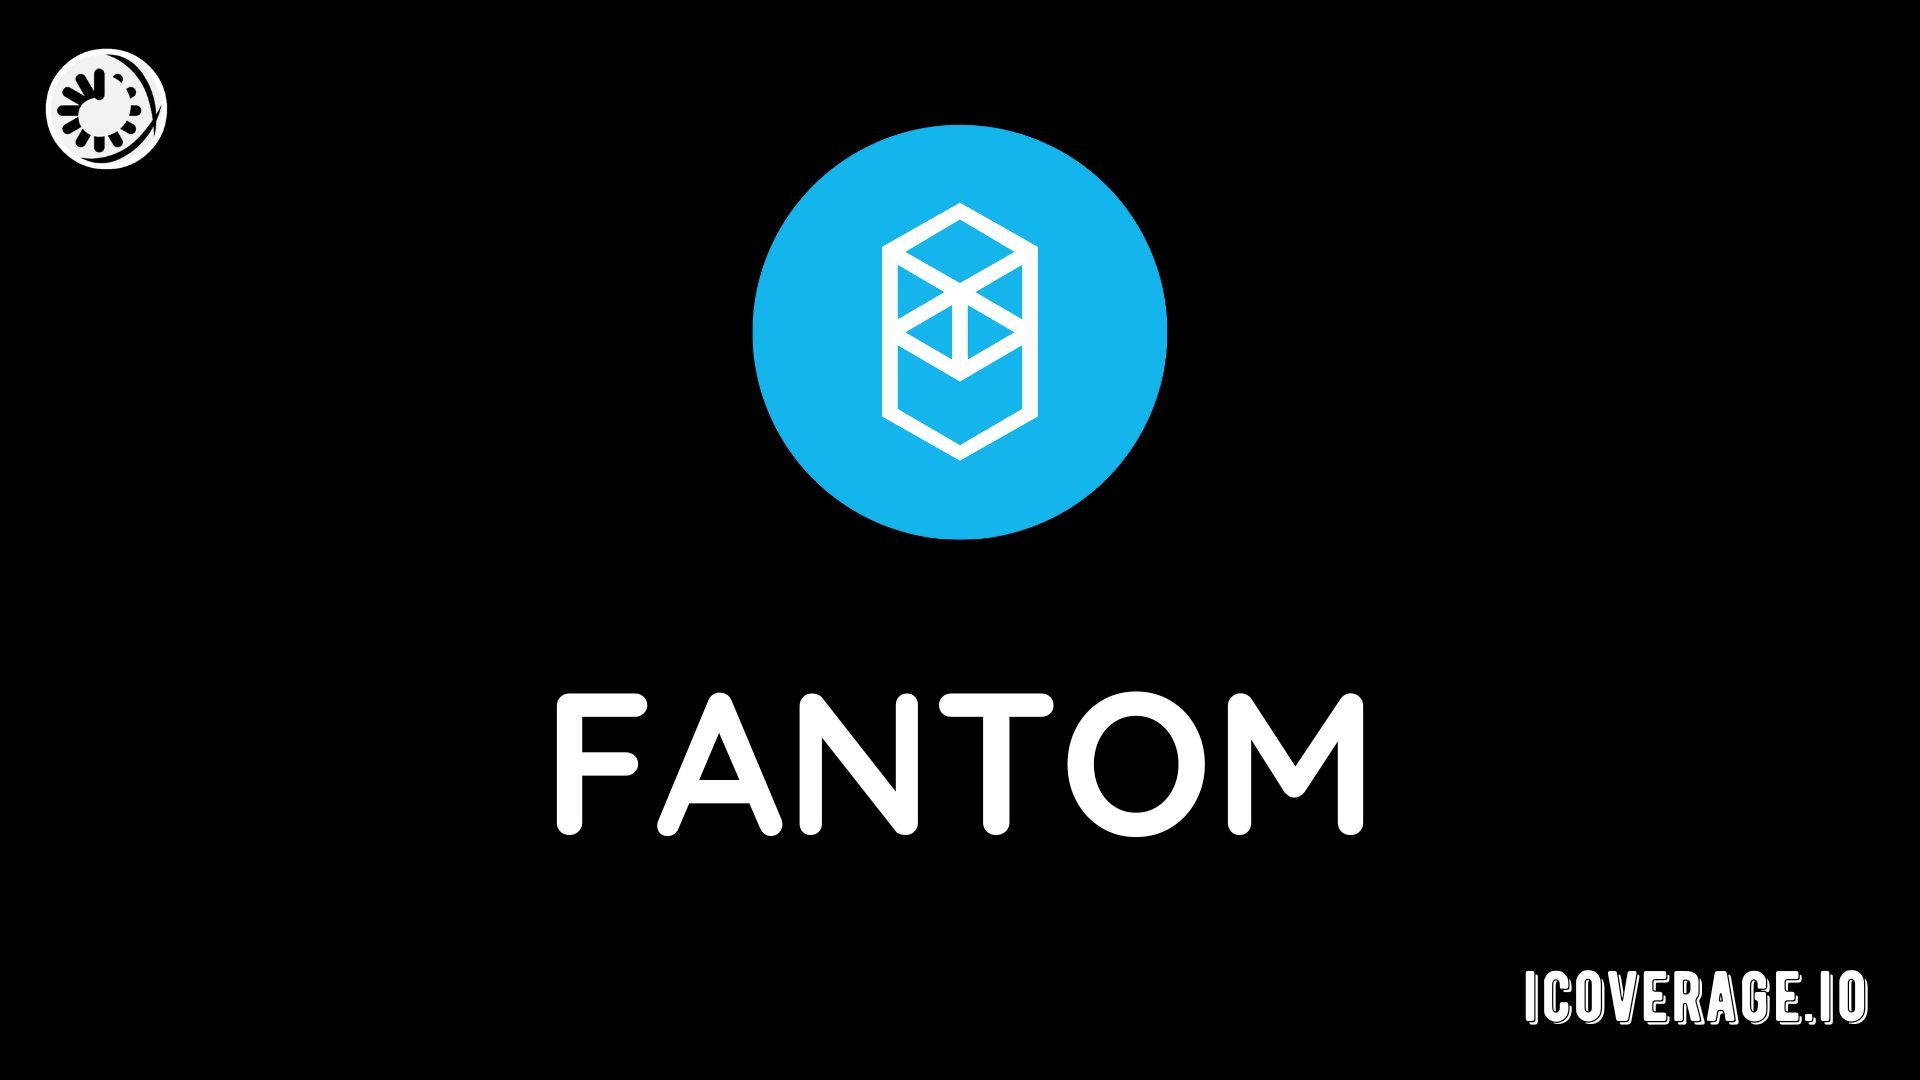 What is Fantom? - Introduction To The Fantom Blockchain and its Lachesis Consensus Protocol